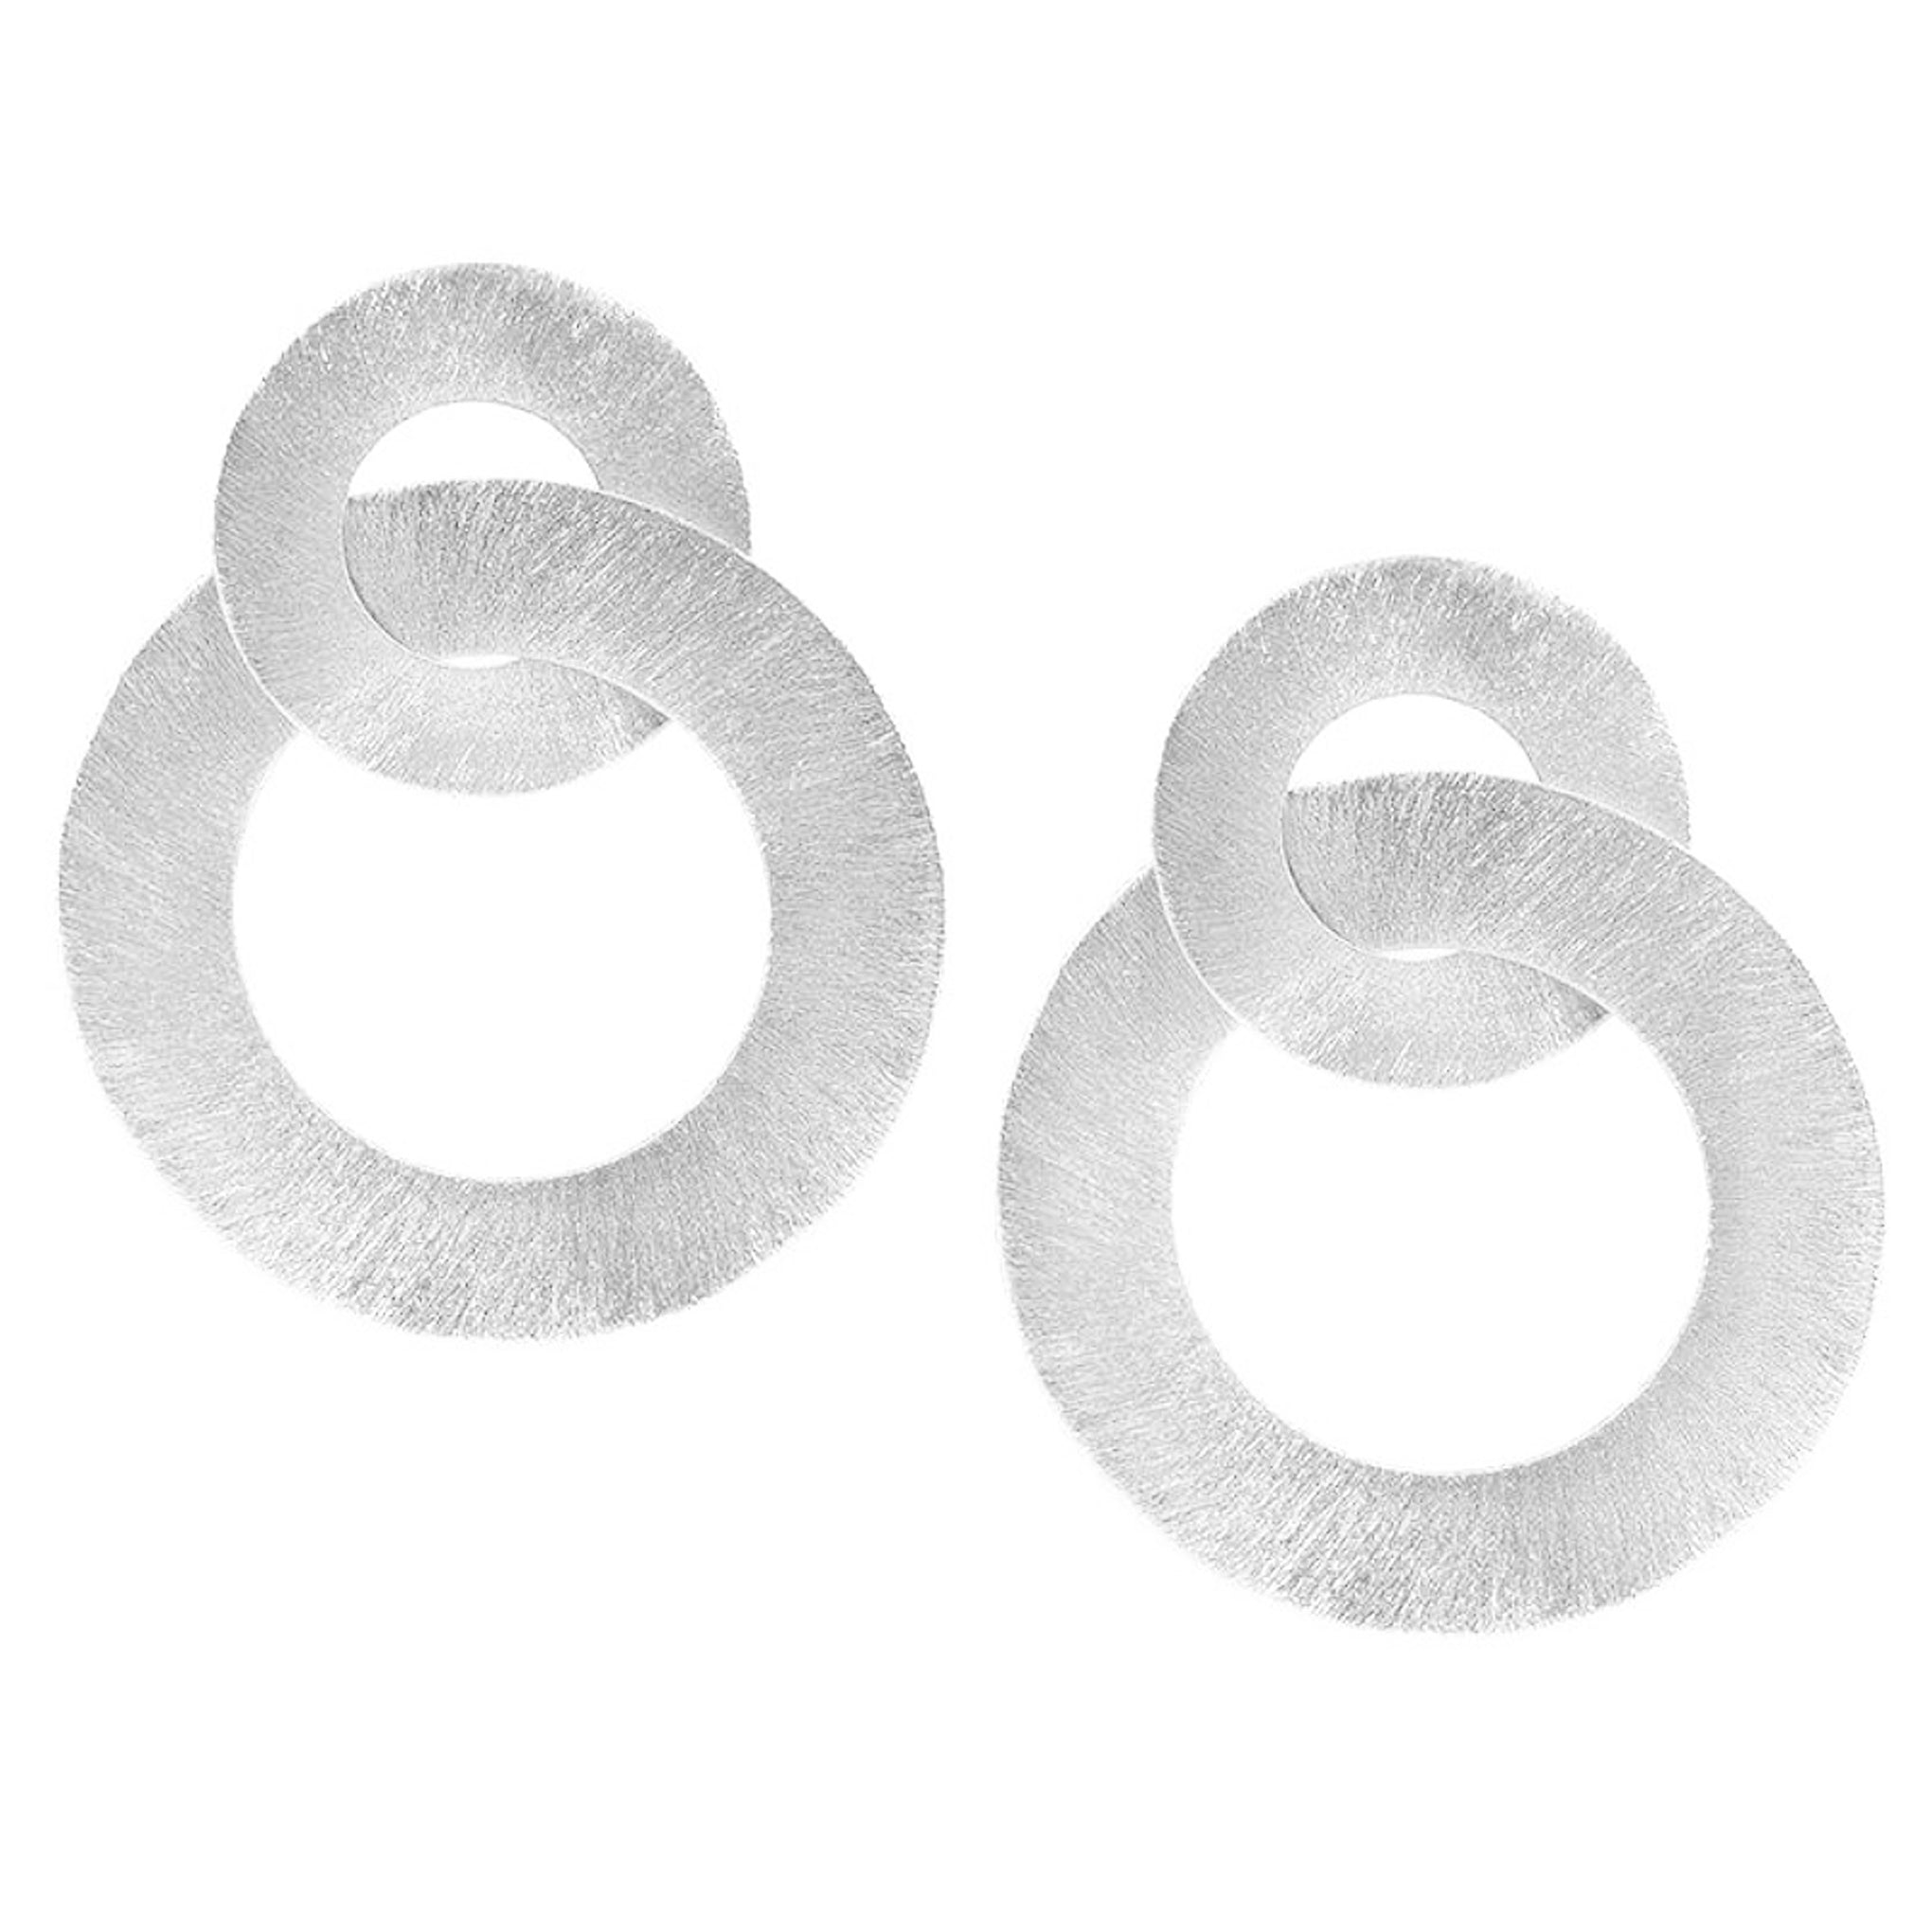 Primary Image of Sheila Fajl Anna Double Hoop Circle Earrings in Brushed Sterling Silver Plated